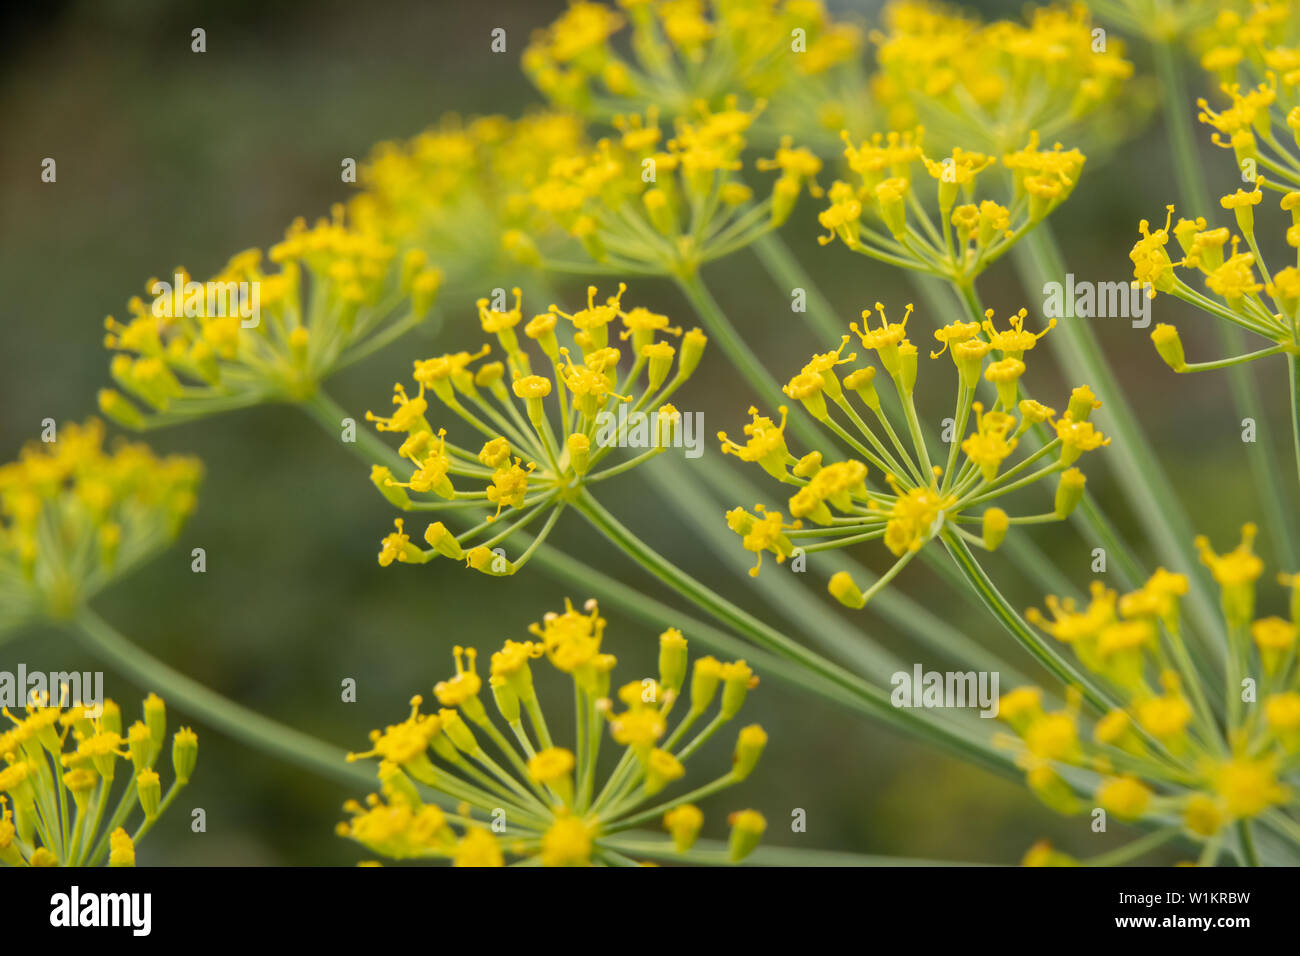 Description: Dill flowers close up. Inflorescences of dill (Anethum graveolens). Stock Photo